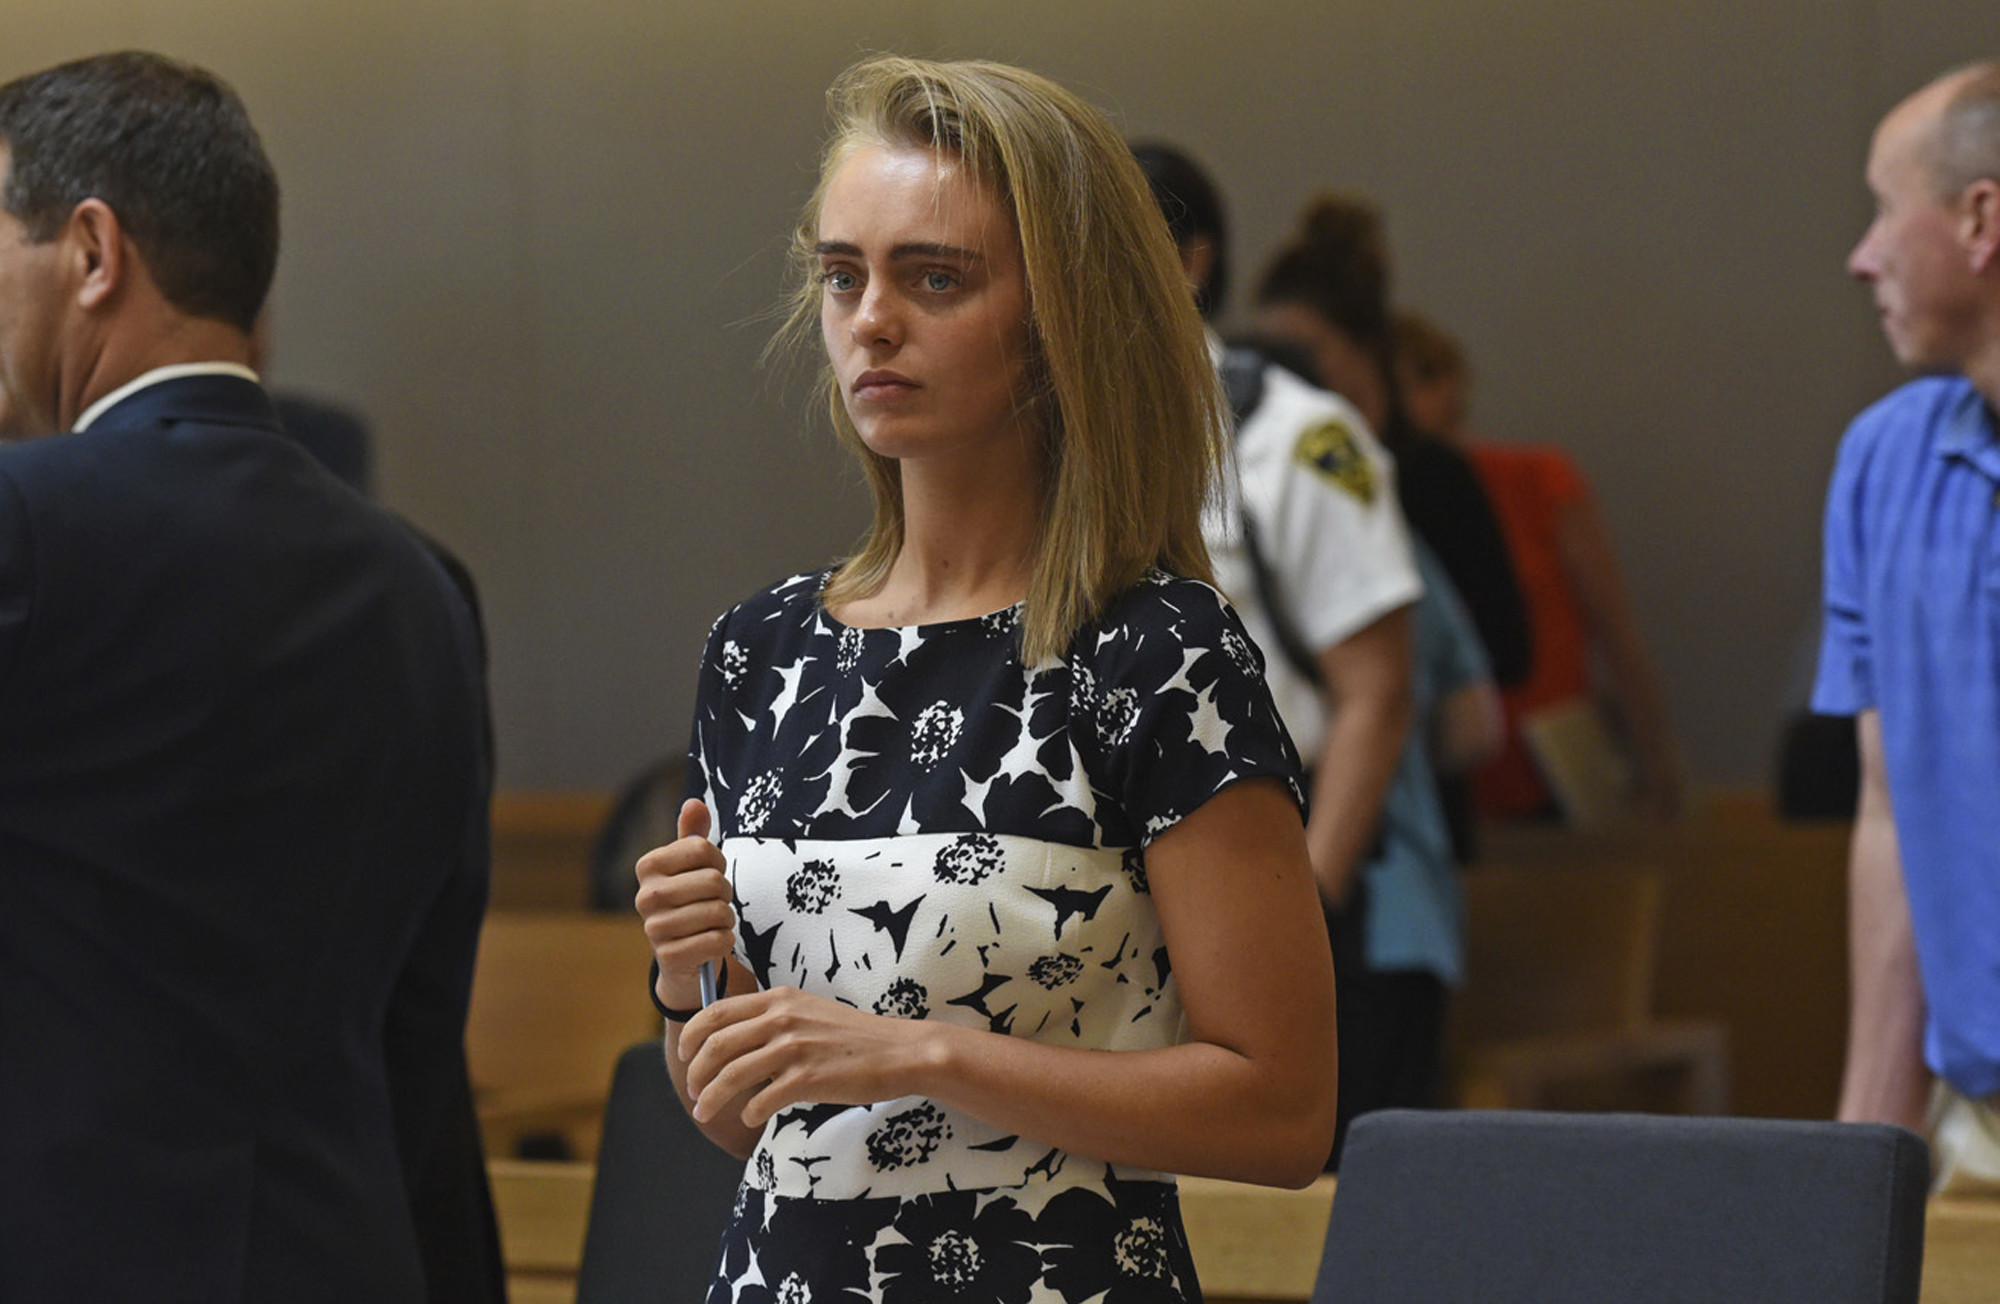 Michelle Carter found guilty in Massachusetts texting suicide case - LA Times